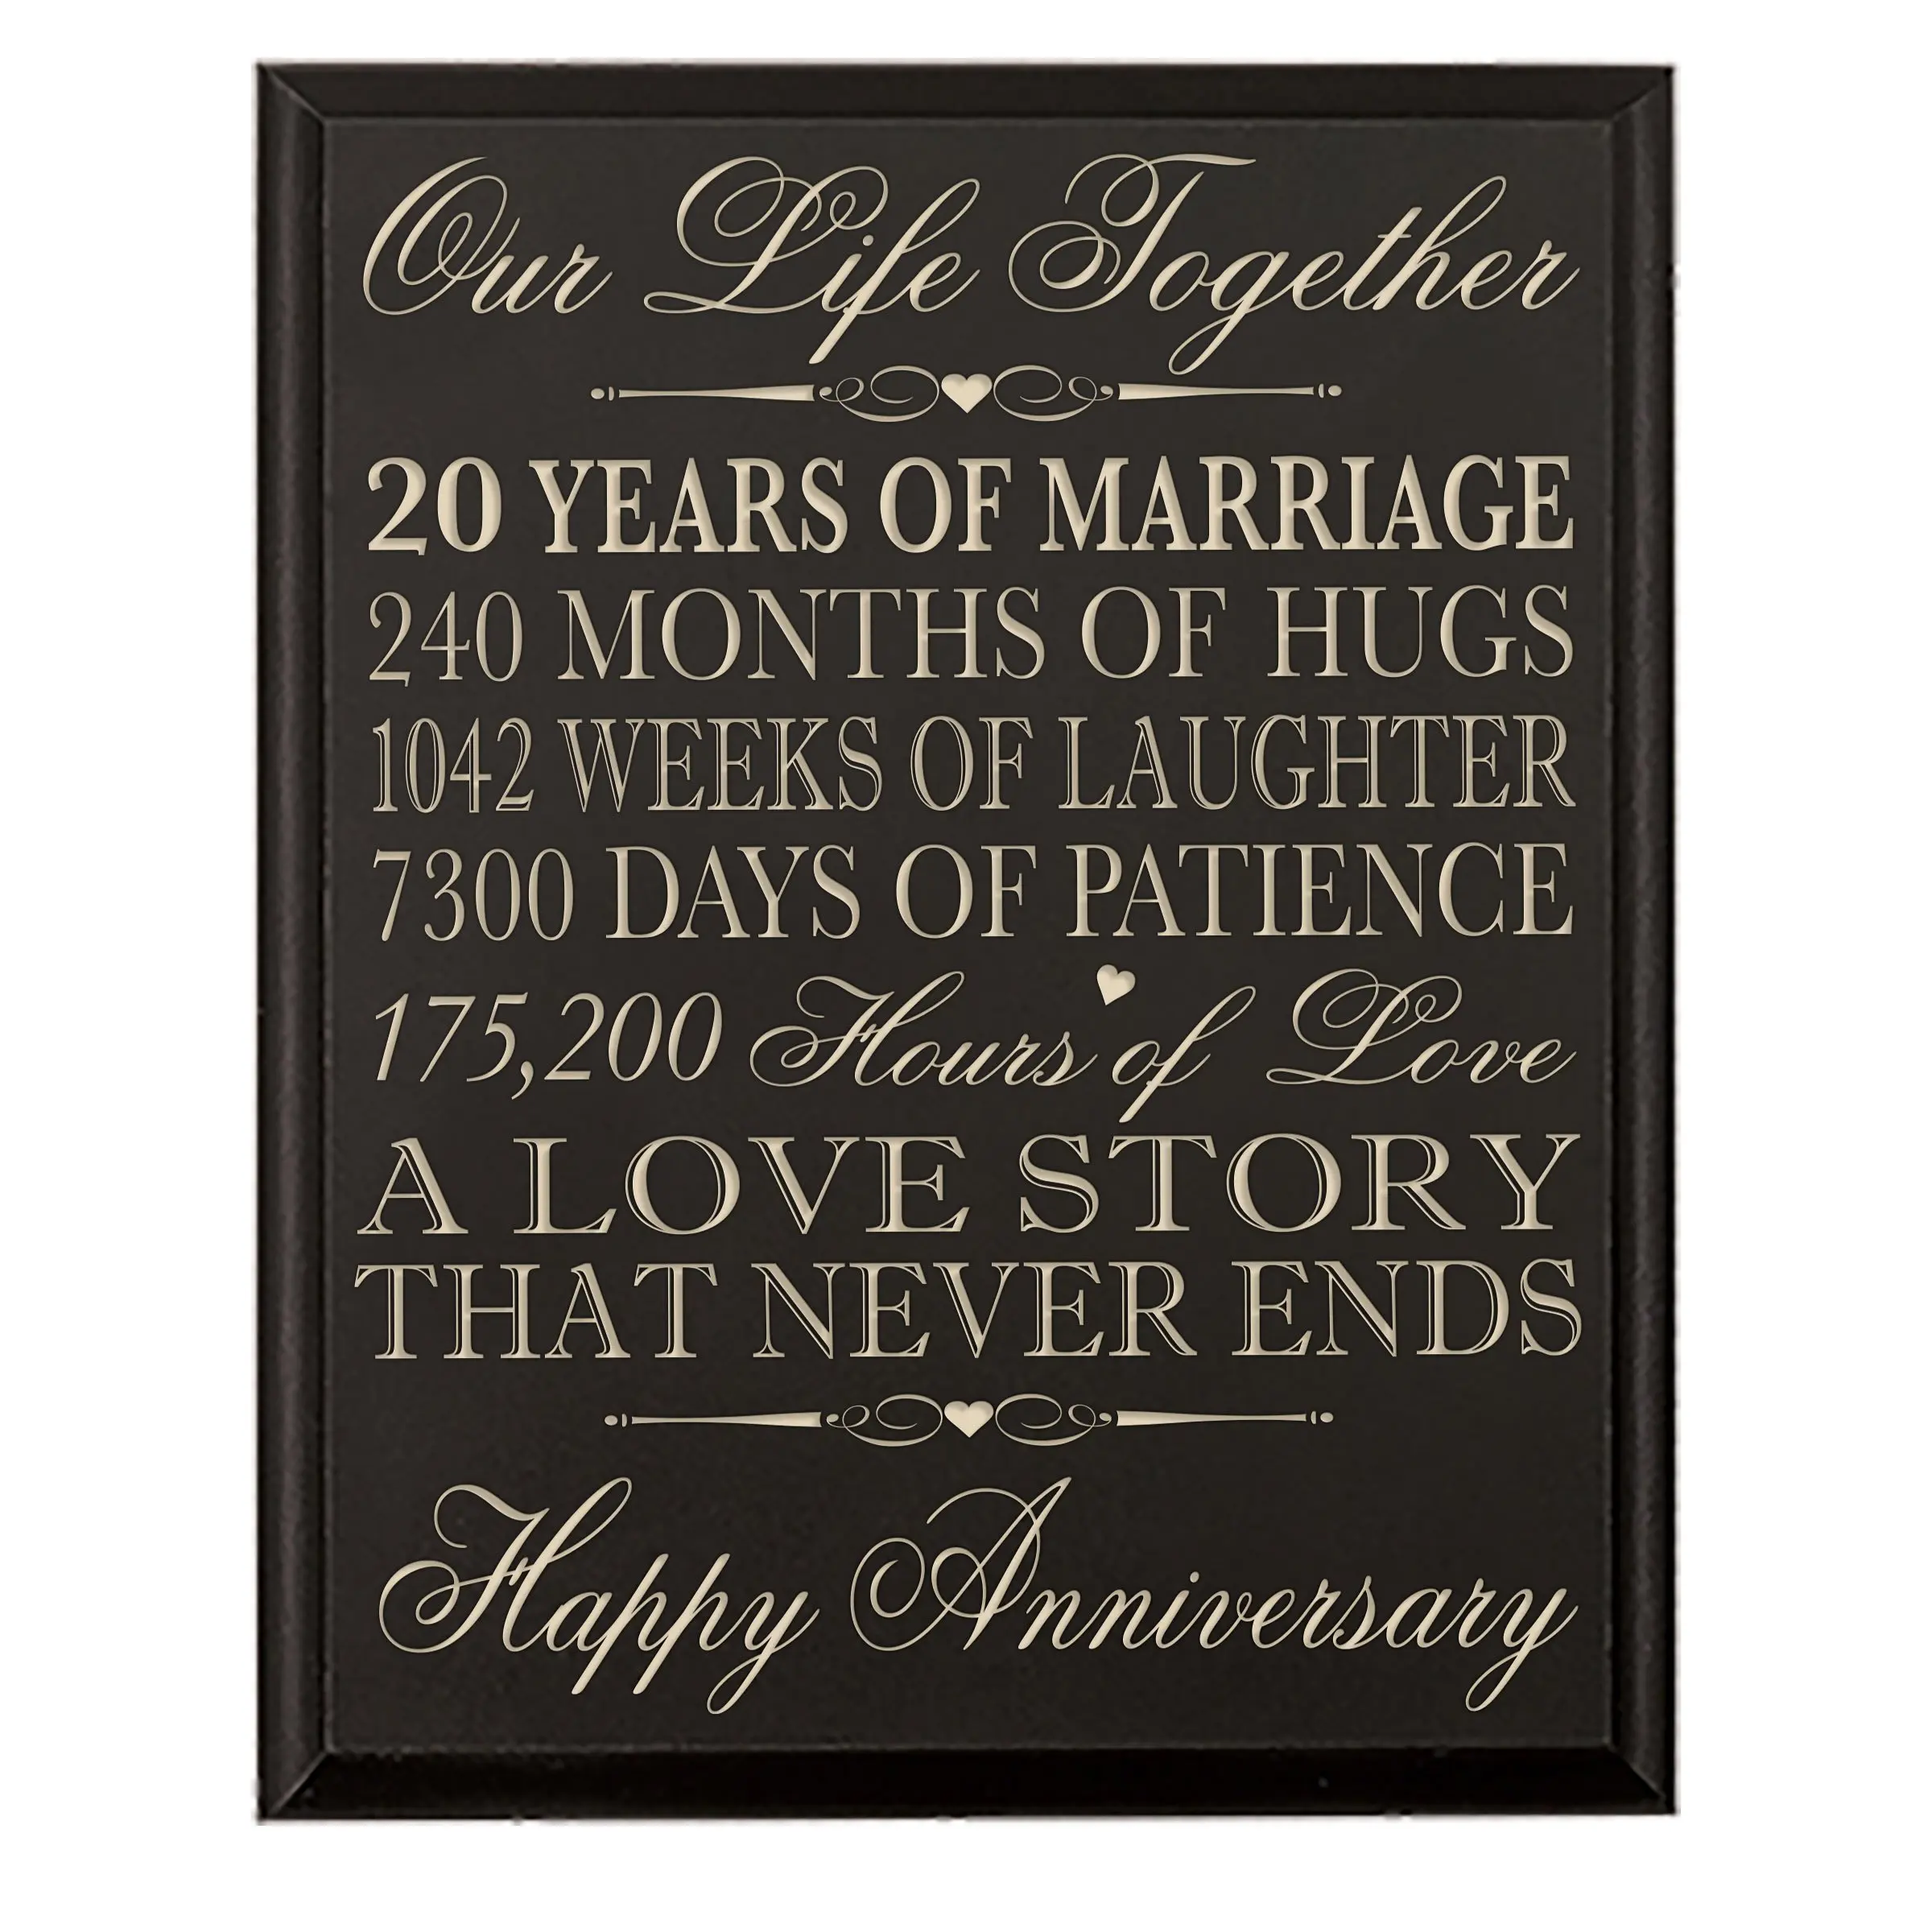 Buy 20th Wedding Anniversary Wall Plaque Gifts for Couple